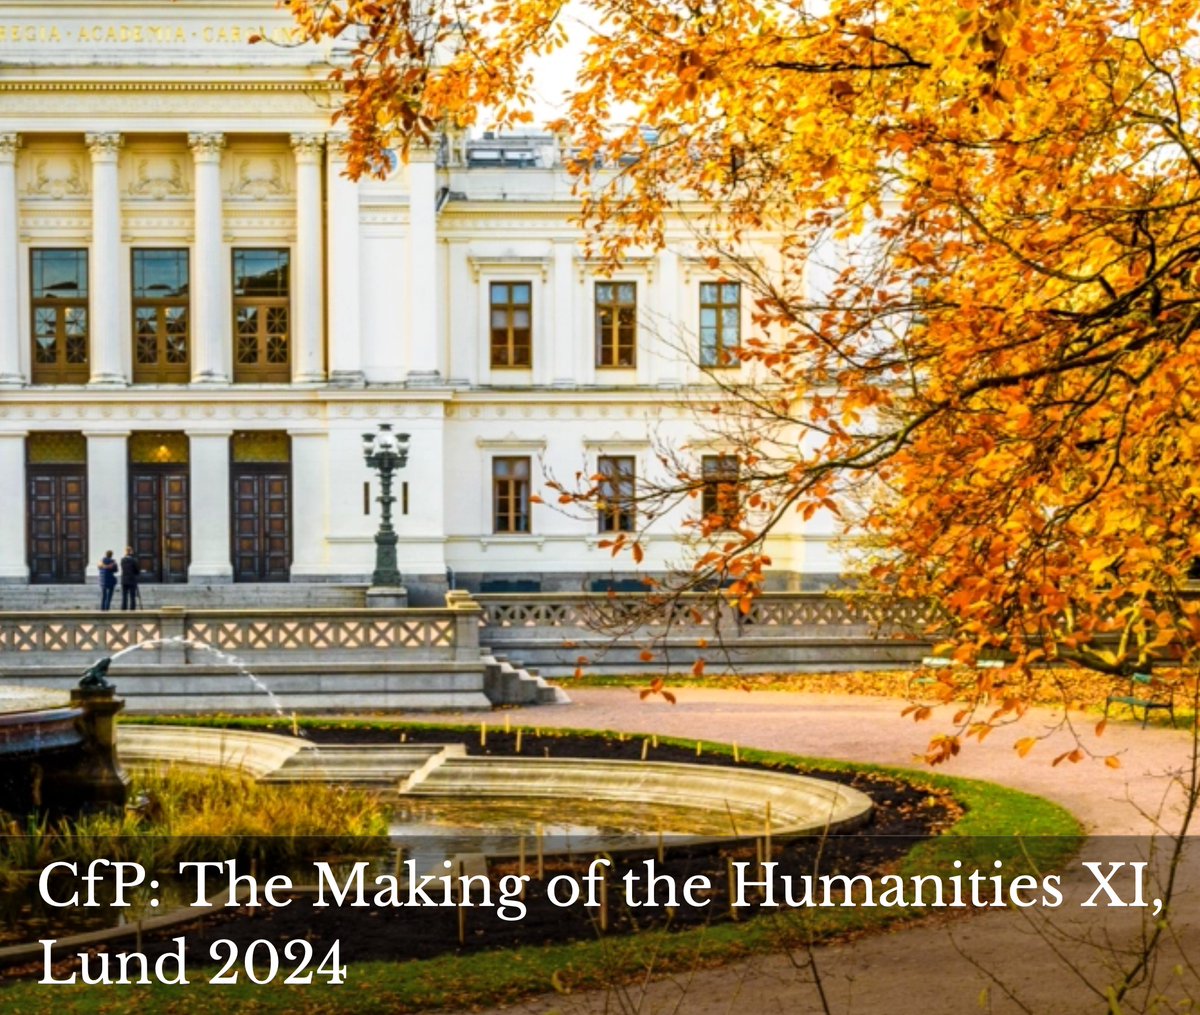 Call for Papers: “The Making of the Humanities” On 9–11 October, 2024, the eleventh conference in this series will be hosted by LUCK. This year’s special conference theme is “Shifting Cultures of Knowledge in the History of the Humanities”. newhistoryofknowledge.com/2024/02/02/cfp…